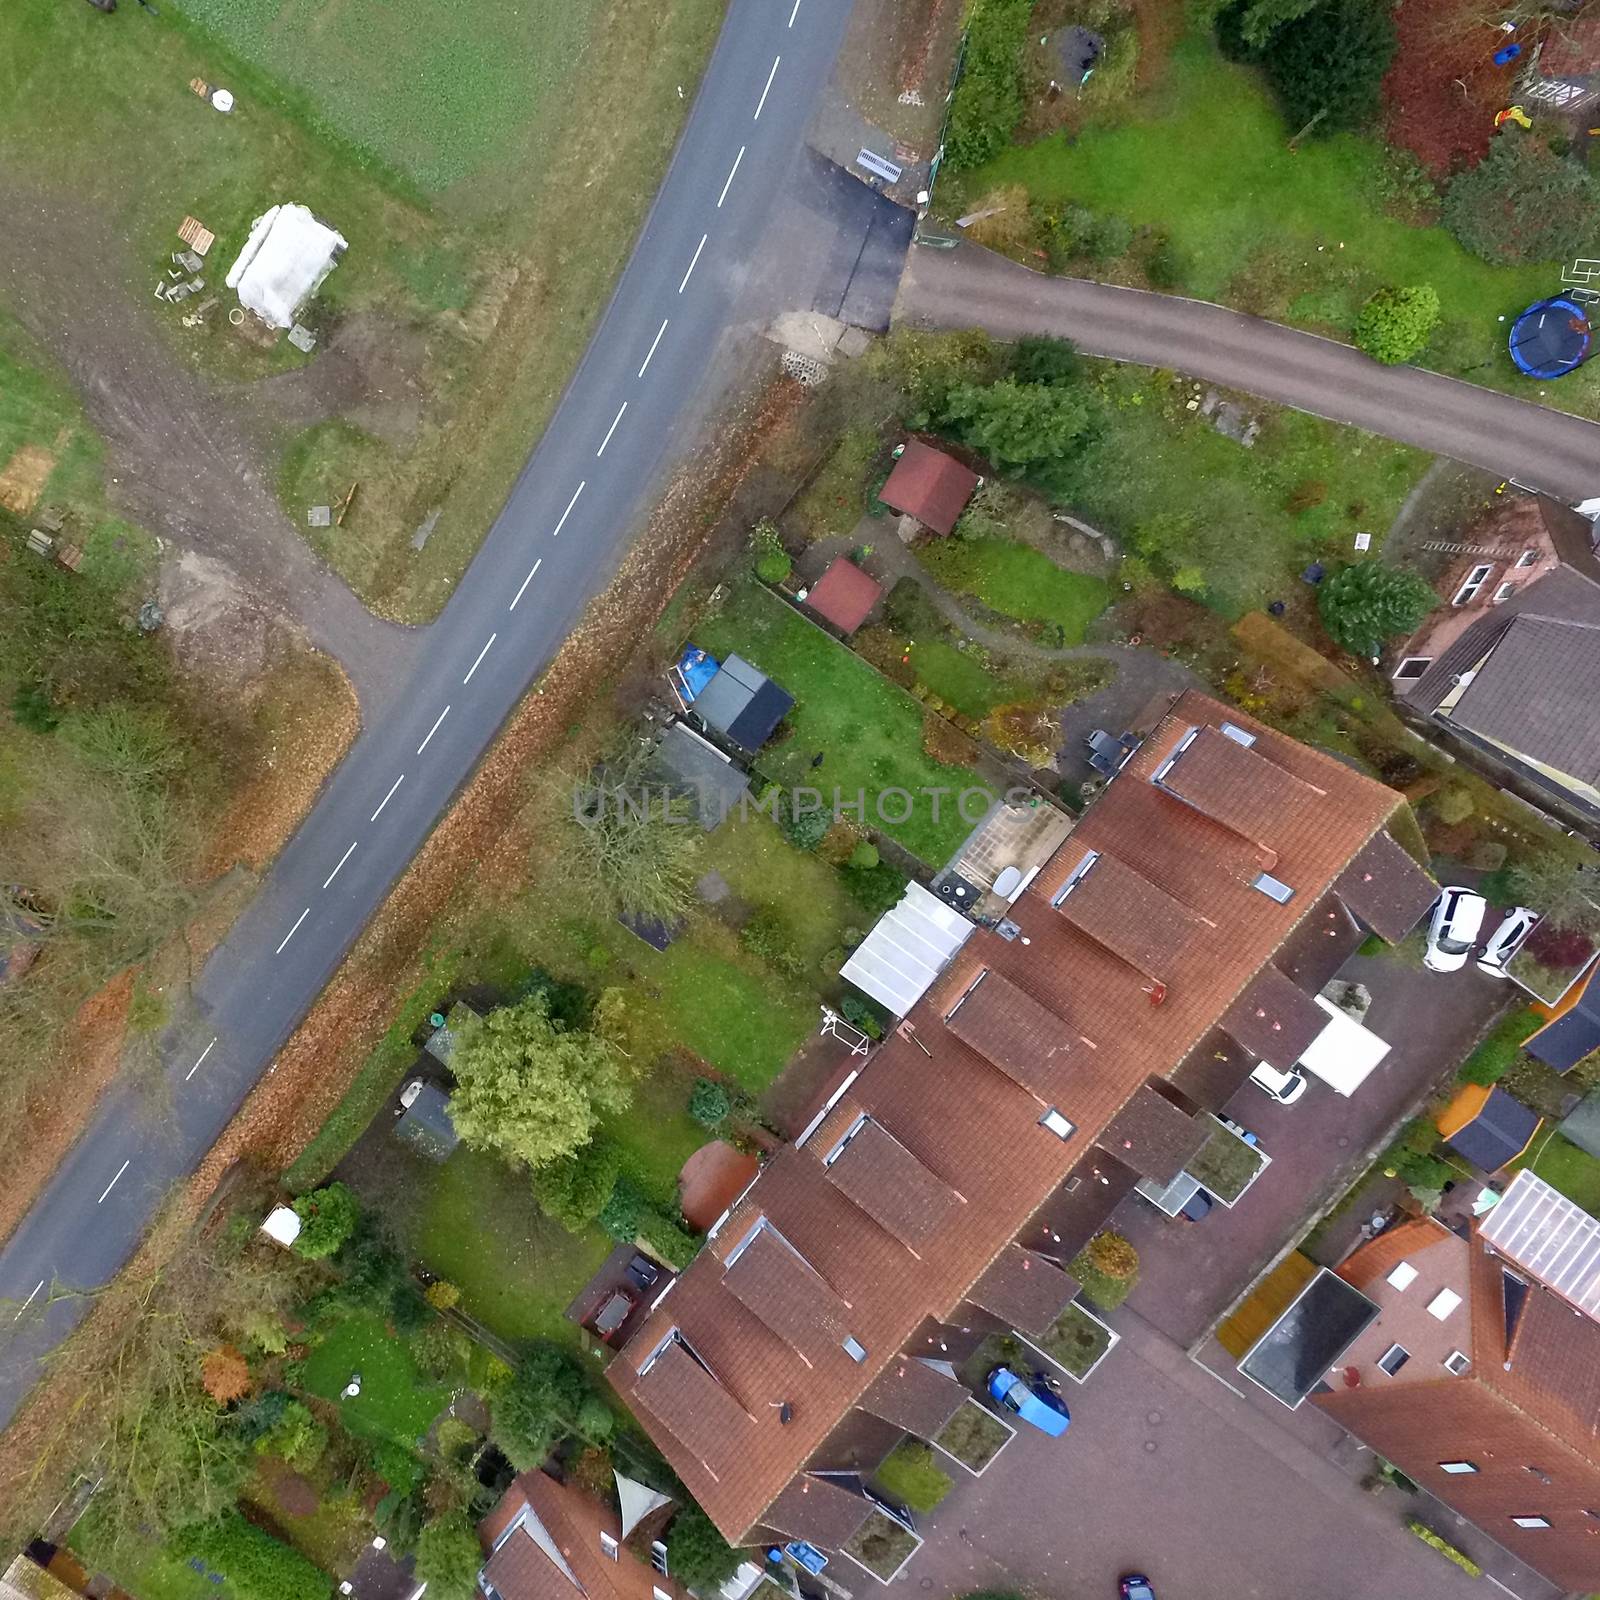 Aerial view of a terraced house with garden and lawn next to a country road without cars by geogif